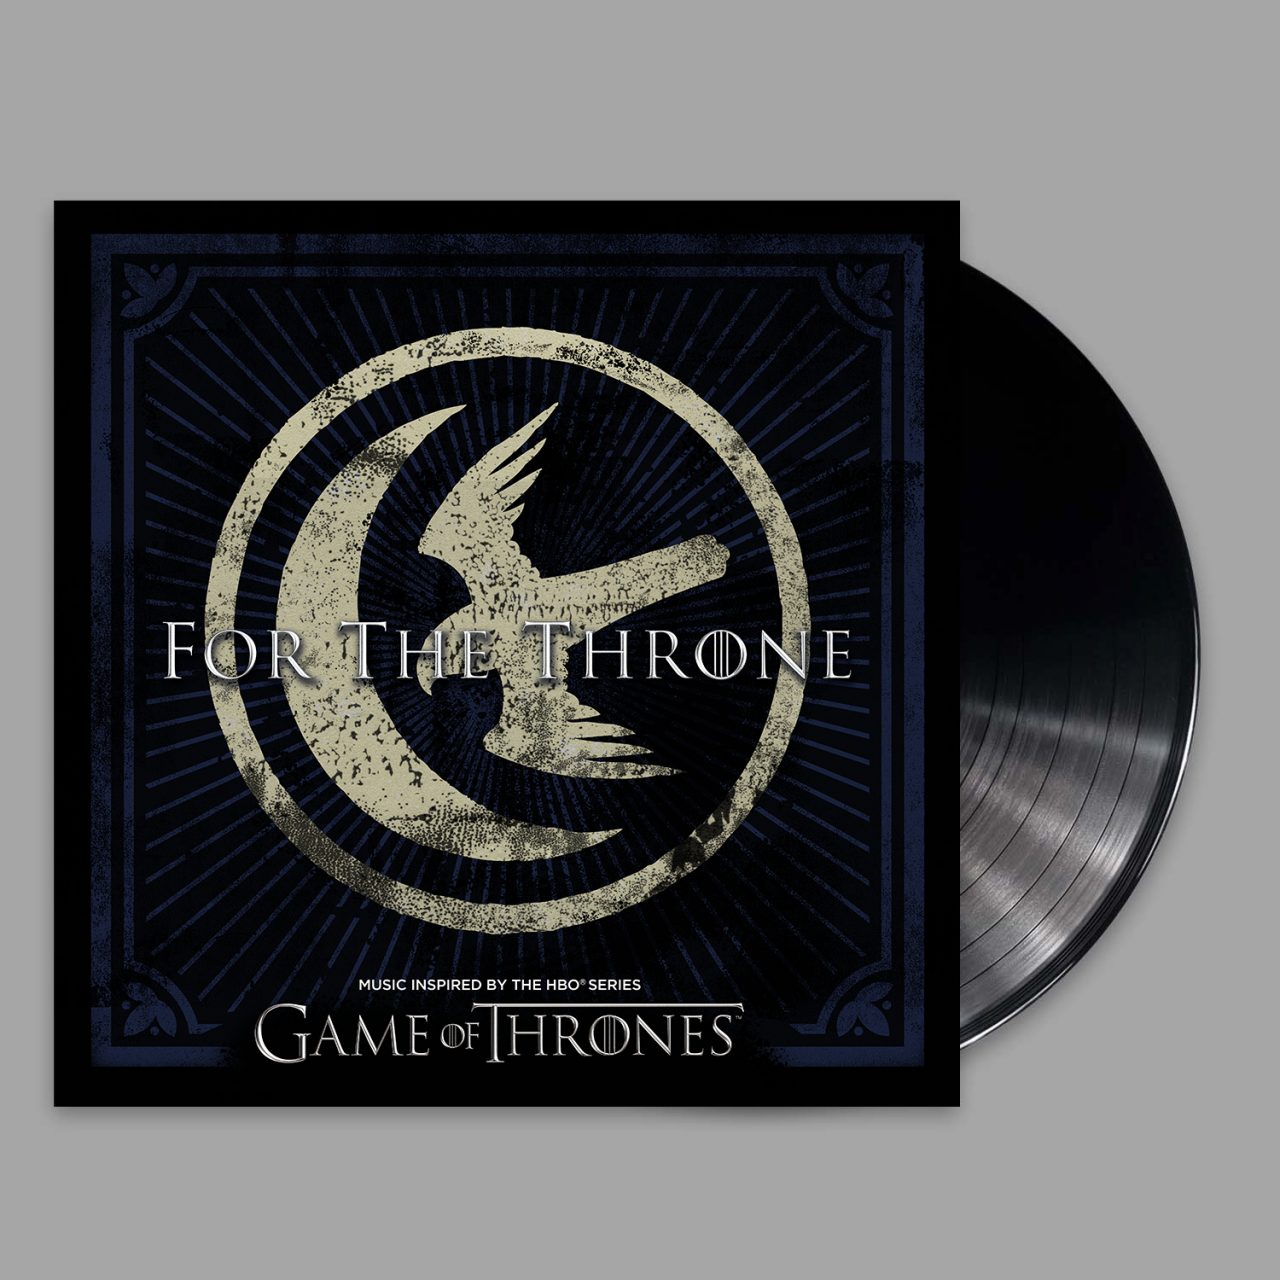 For The Throne Music Inspired By The HBO Series Game Of Thrones Vinyl Packshot (Columbia Records)